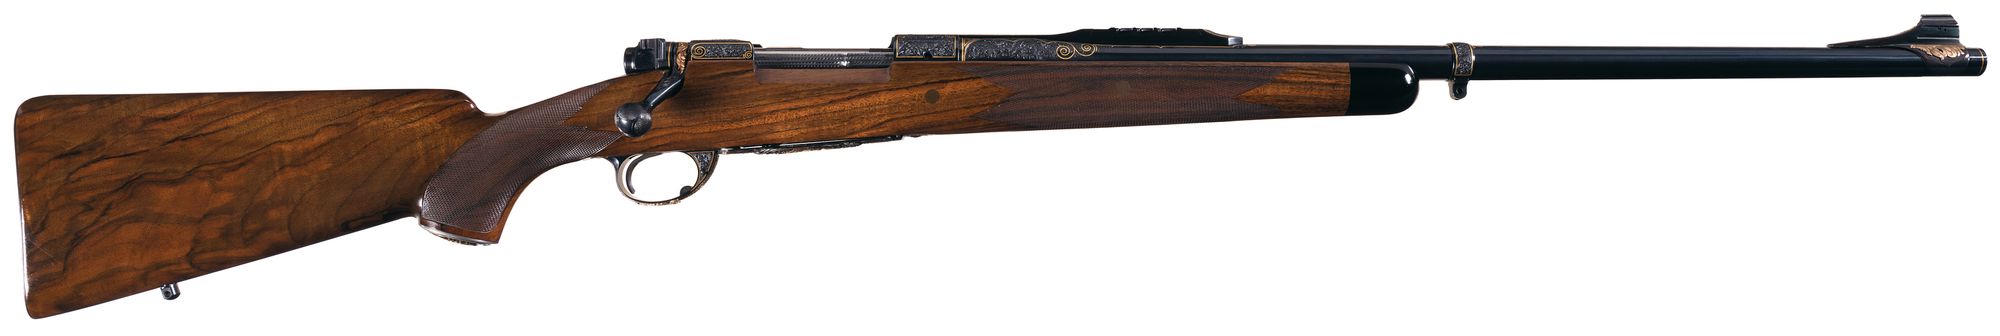 Highly engraved Winchester Model 70